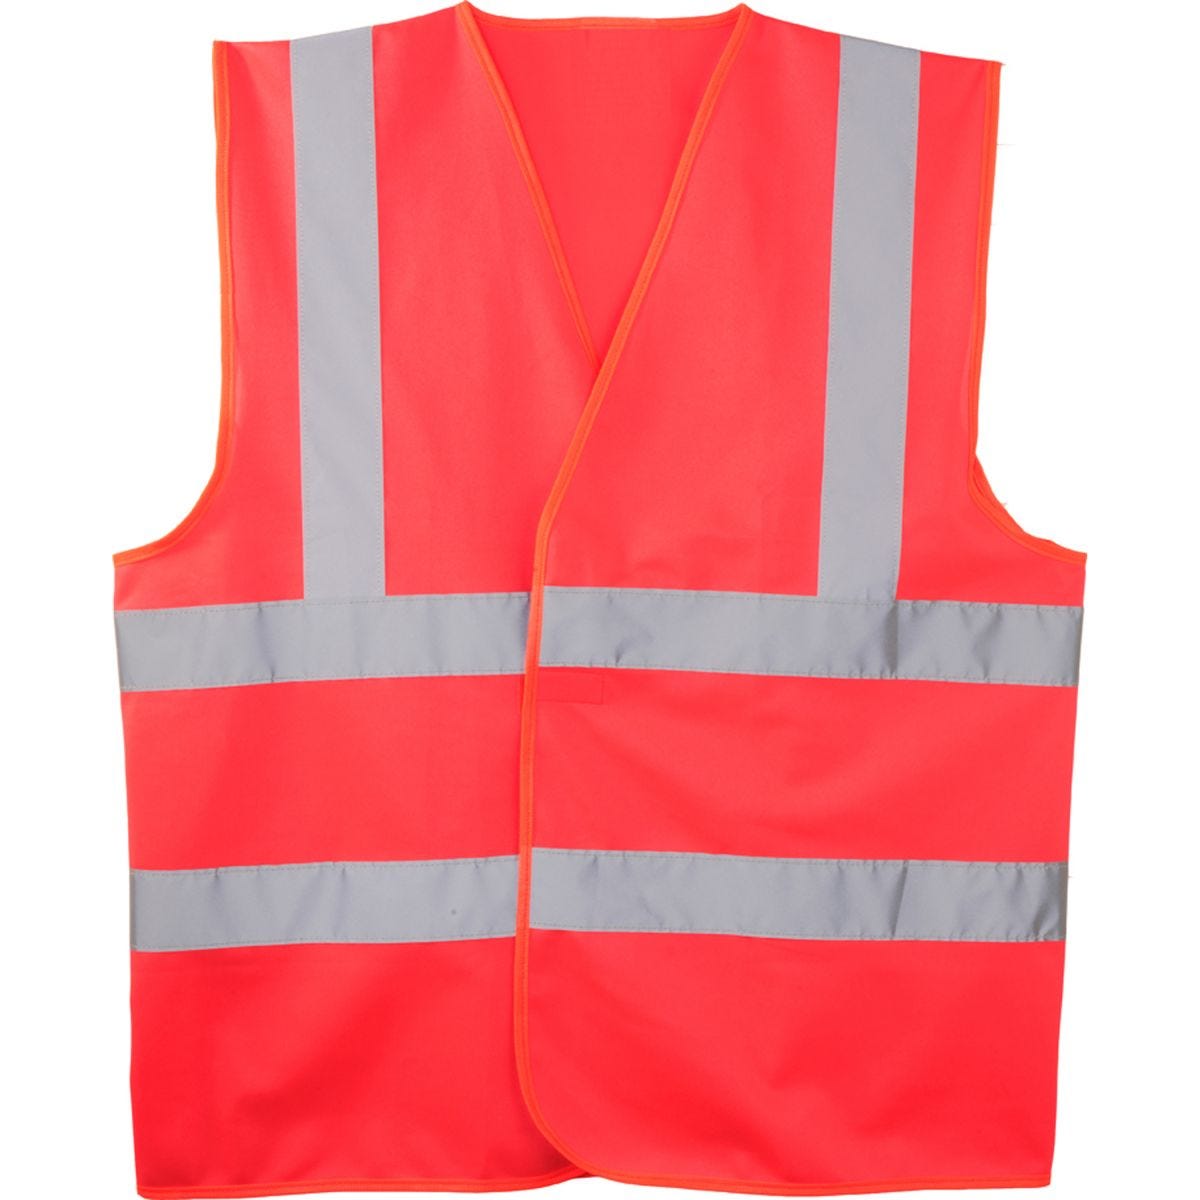 Gilet YARD rouge HV, baudrier + double bande - COVERGUARD - Taille XL 0